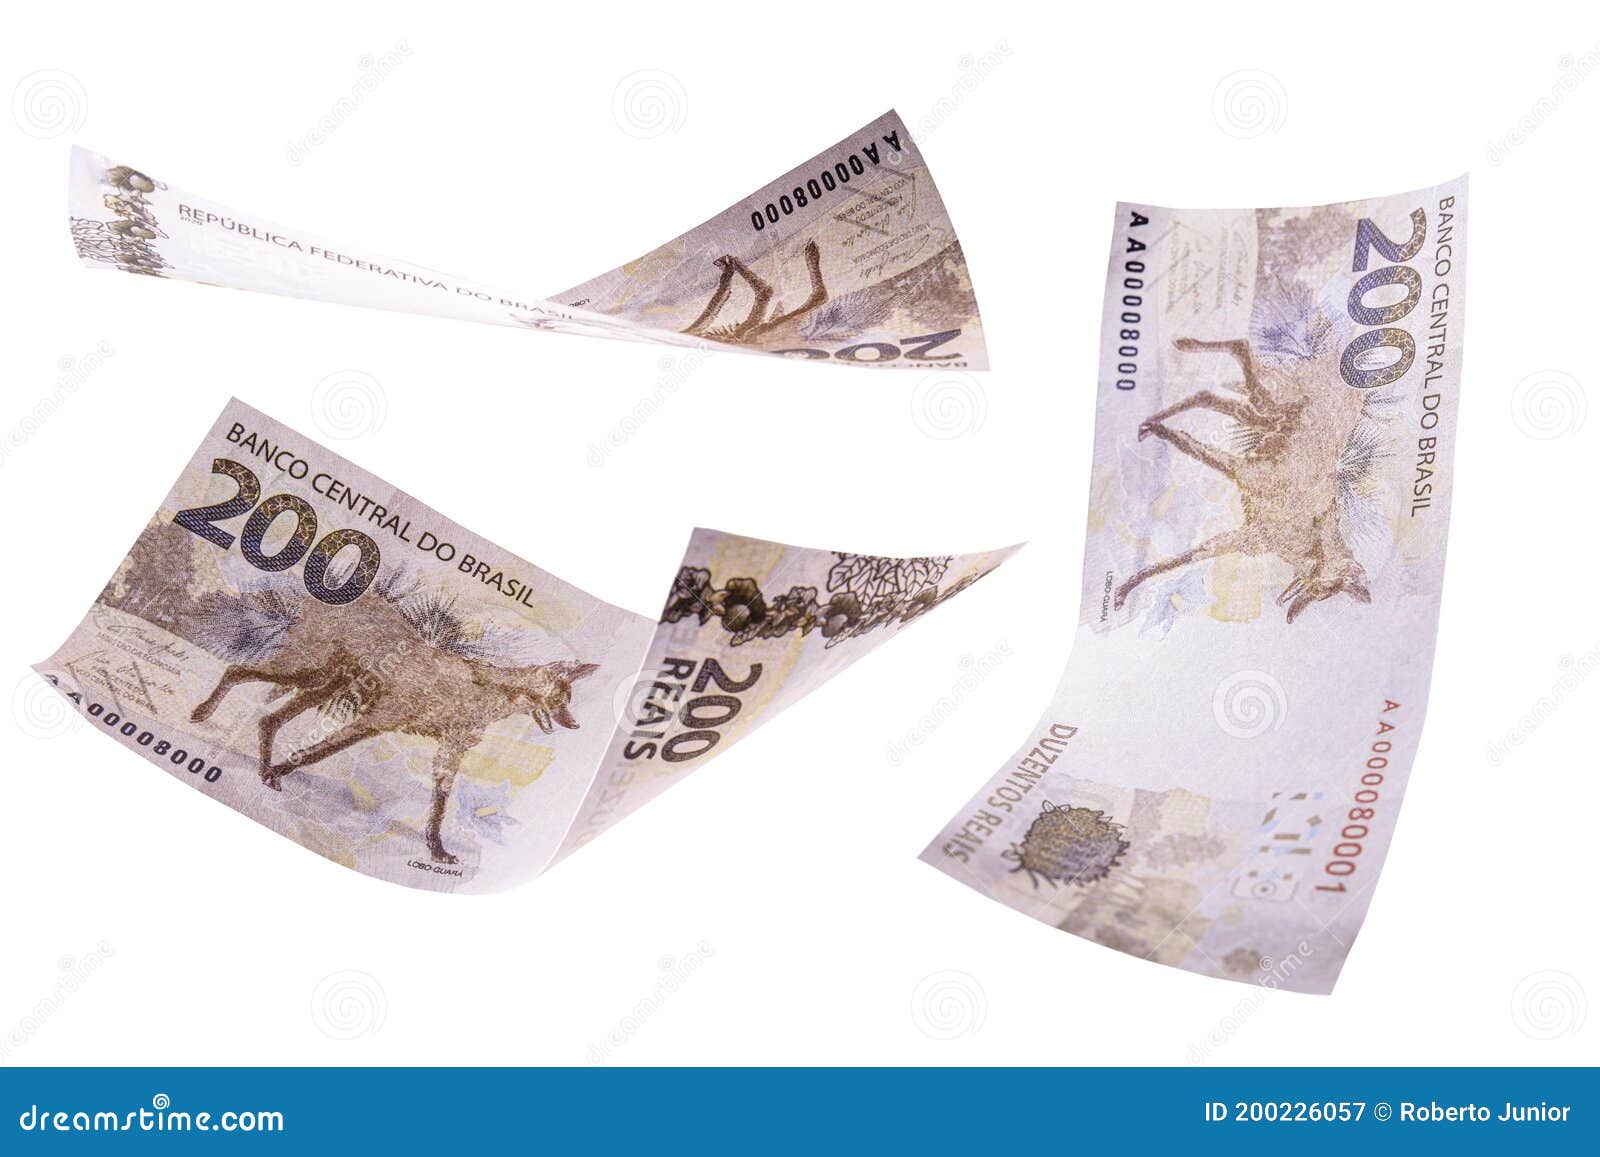 two hundred reais banknotes from brazil falling on  white background, new banknote from brazil